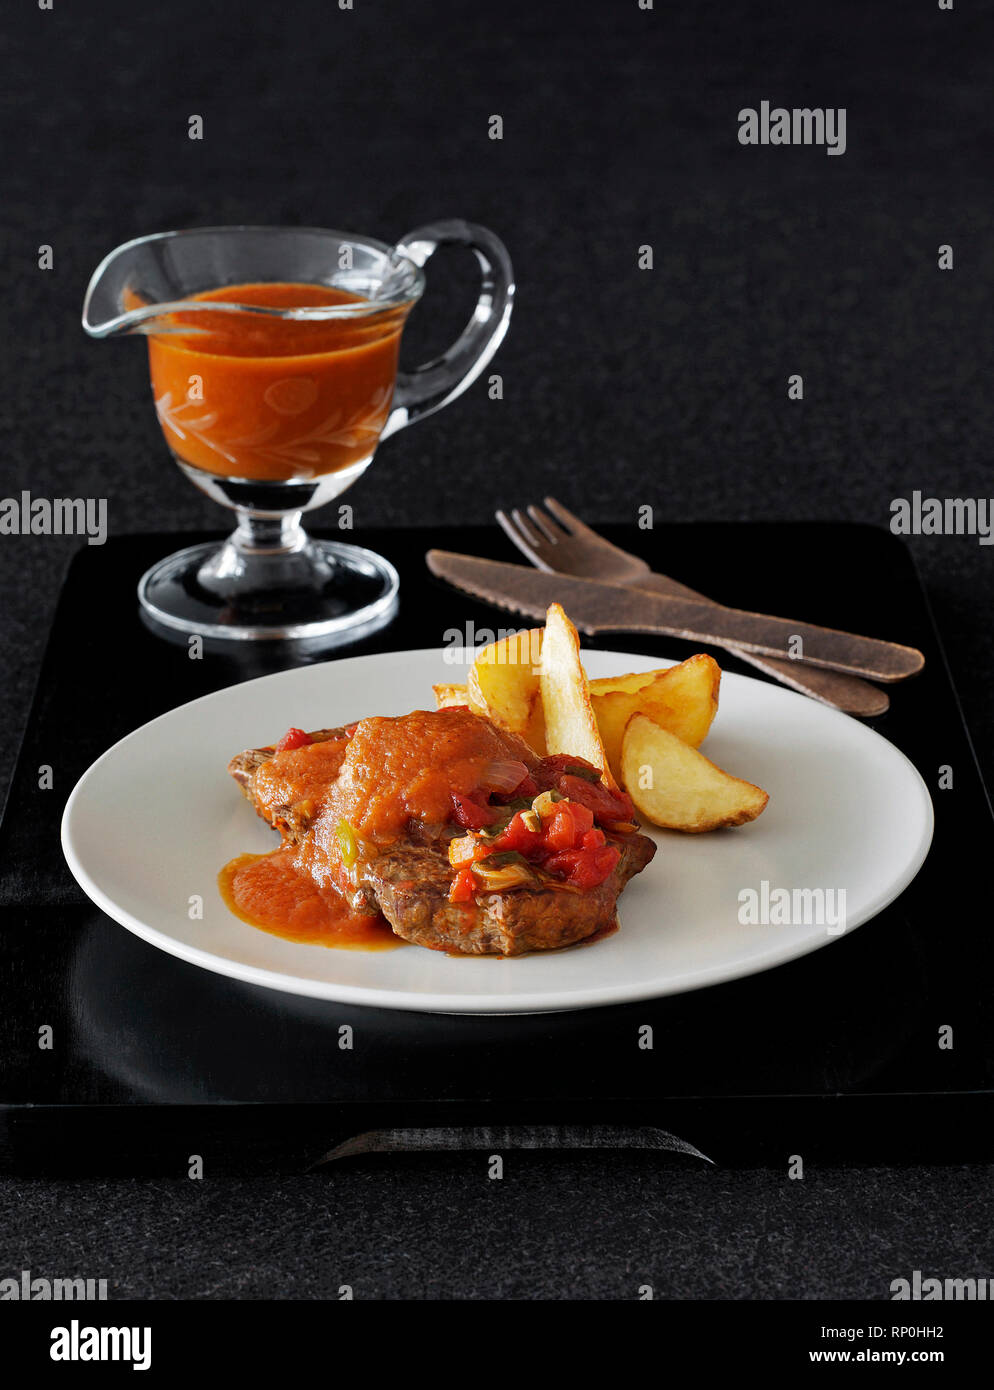 Delicious meat dish Stock Photo